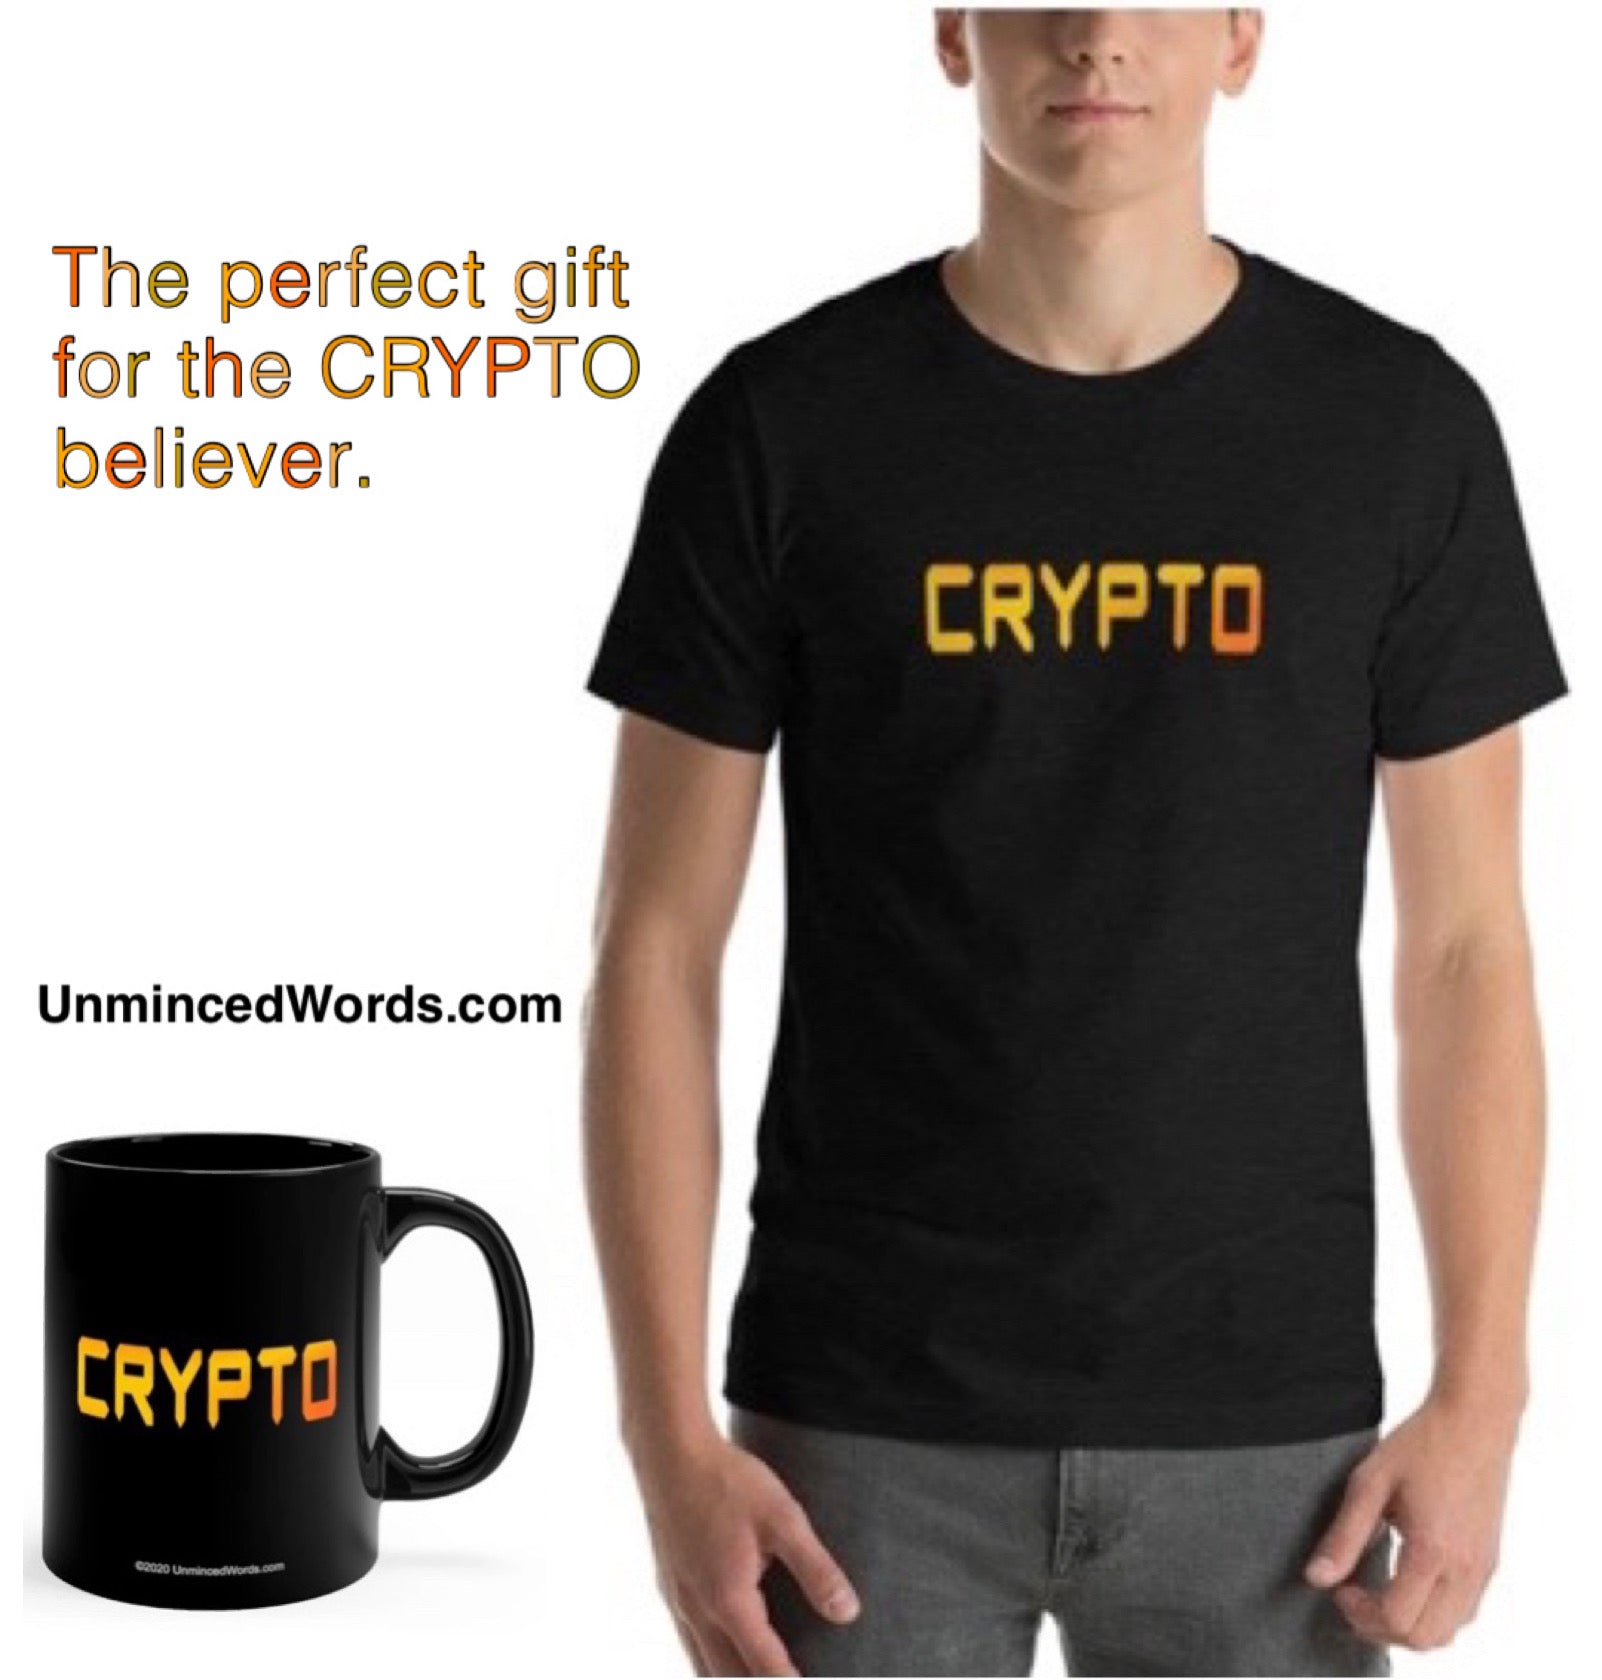 The perfect gift for the CRYPTO believer.